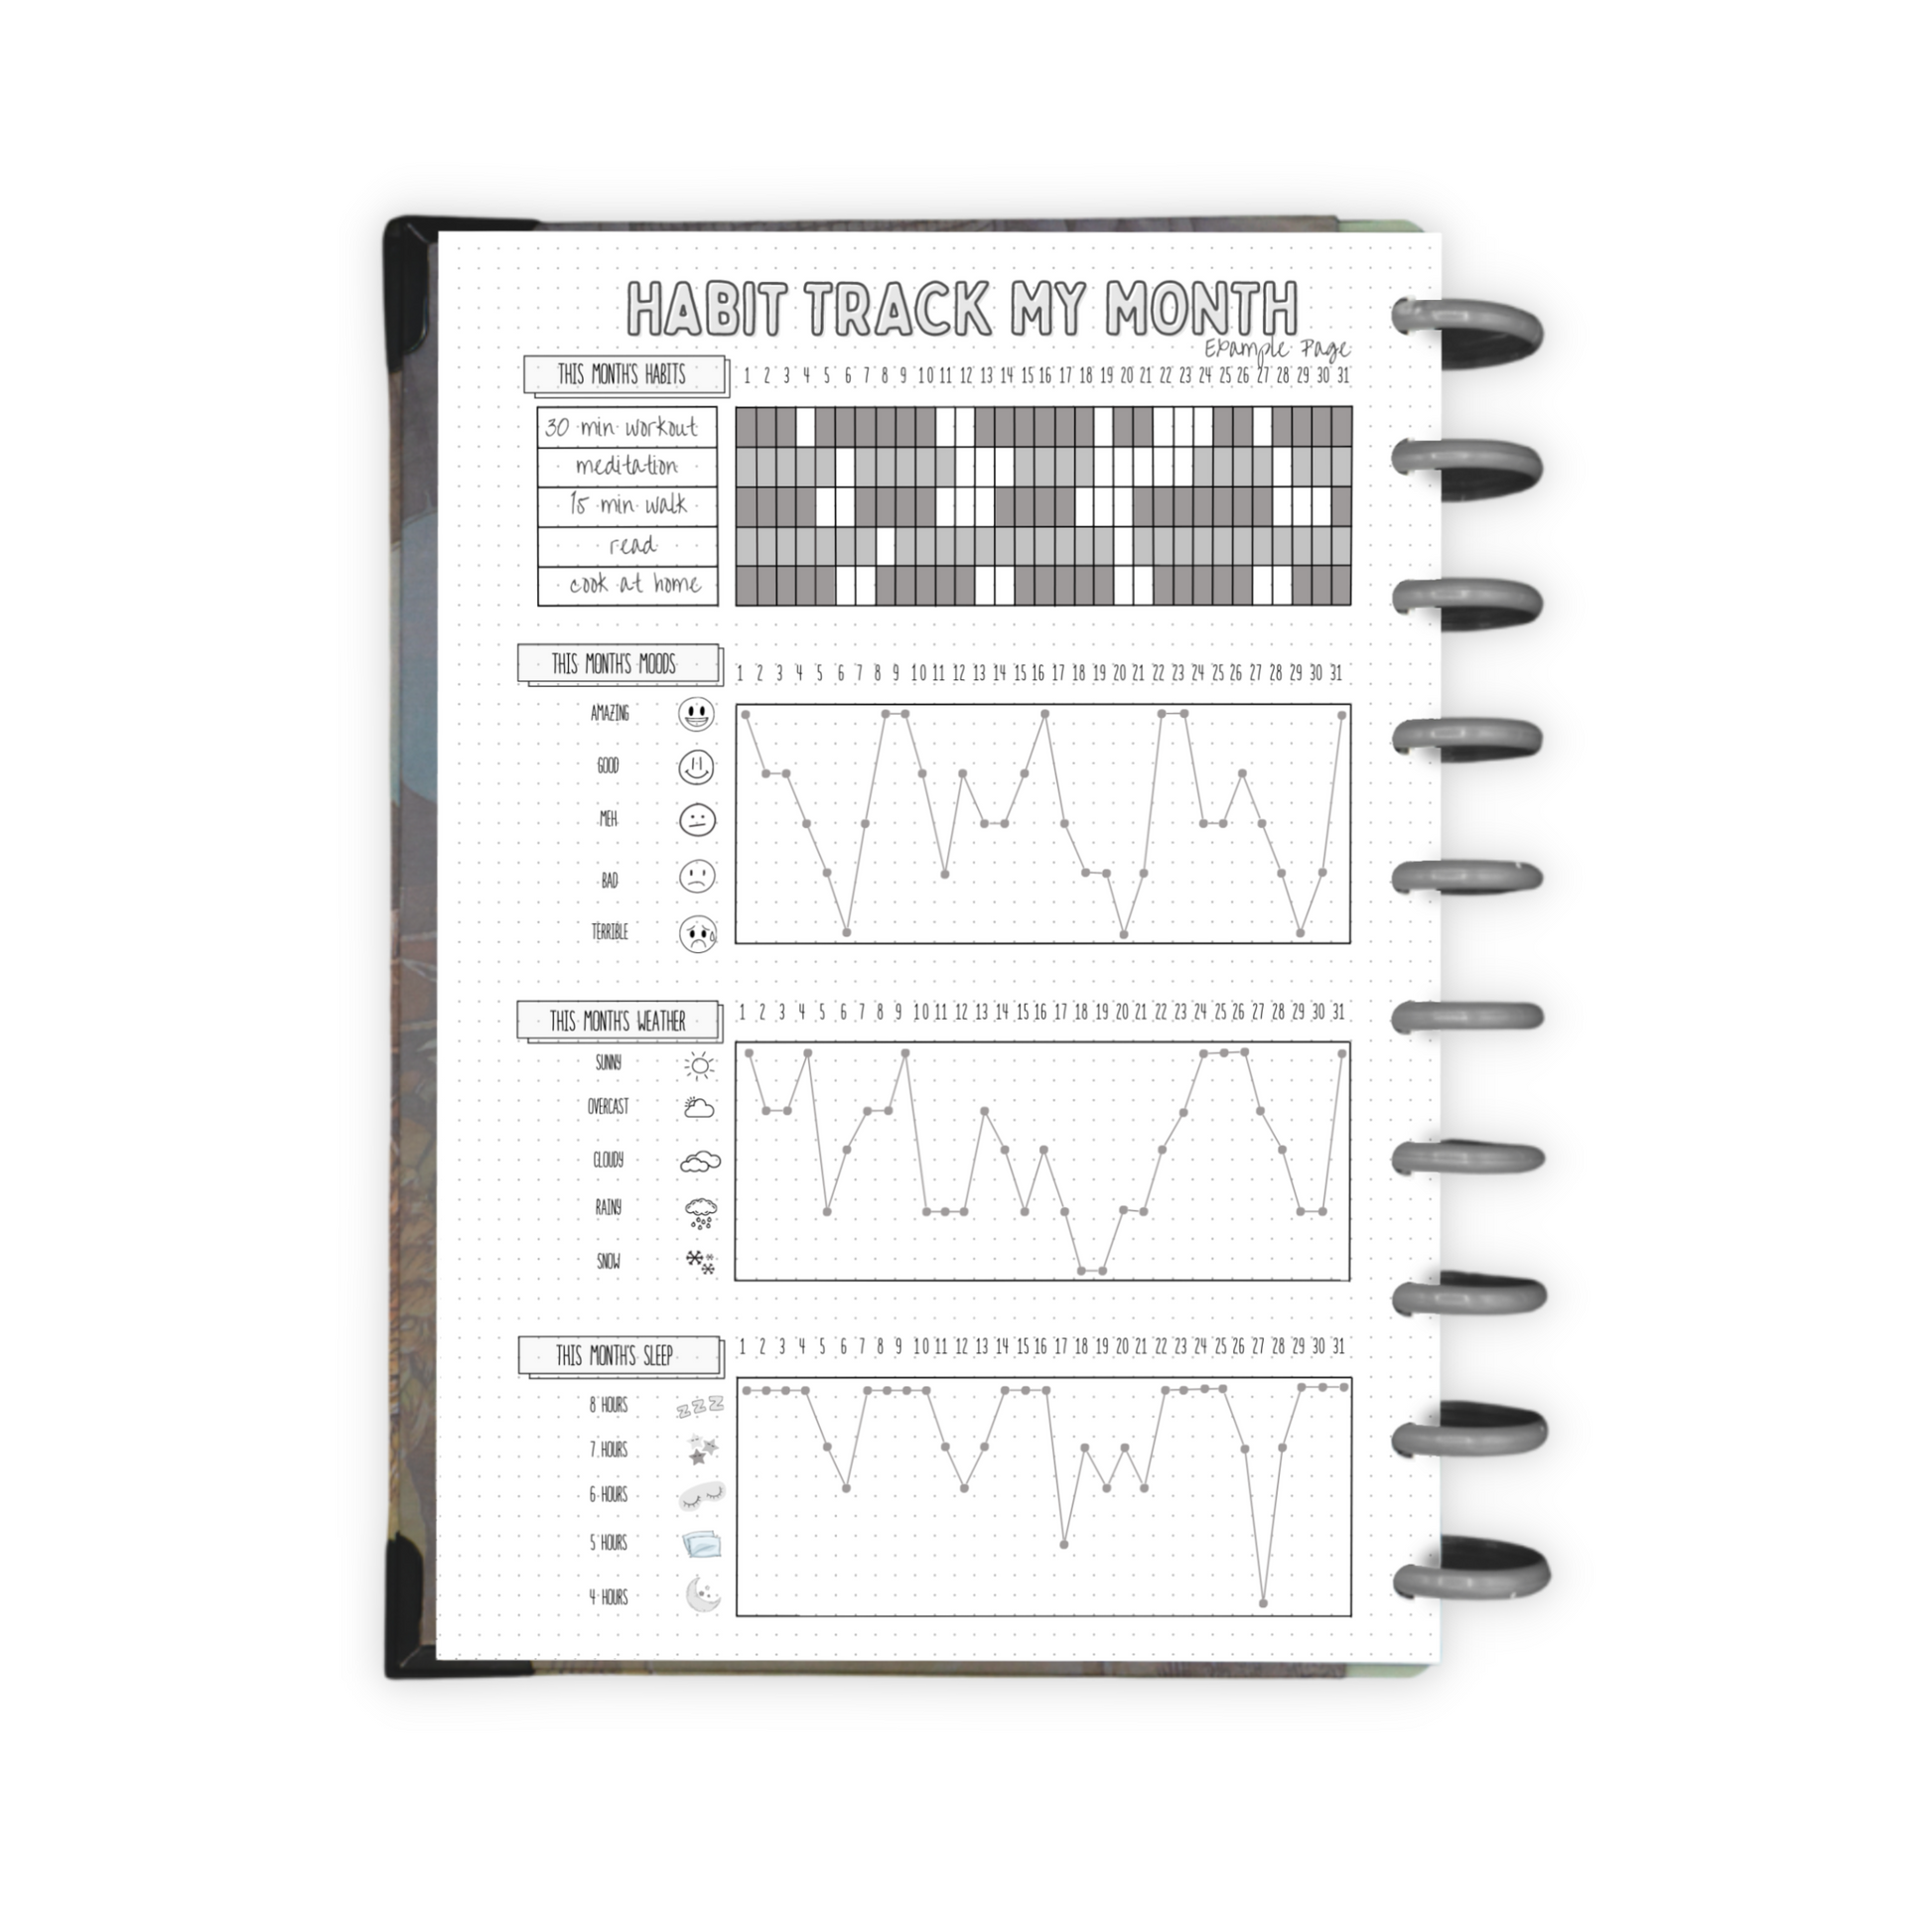 "Habit Track My Month" example page in a planner